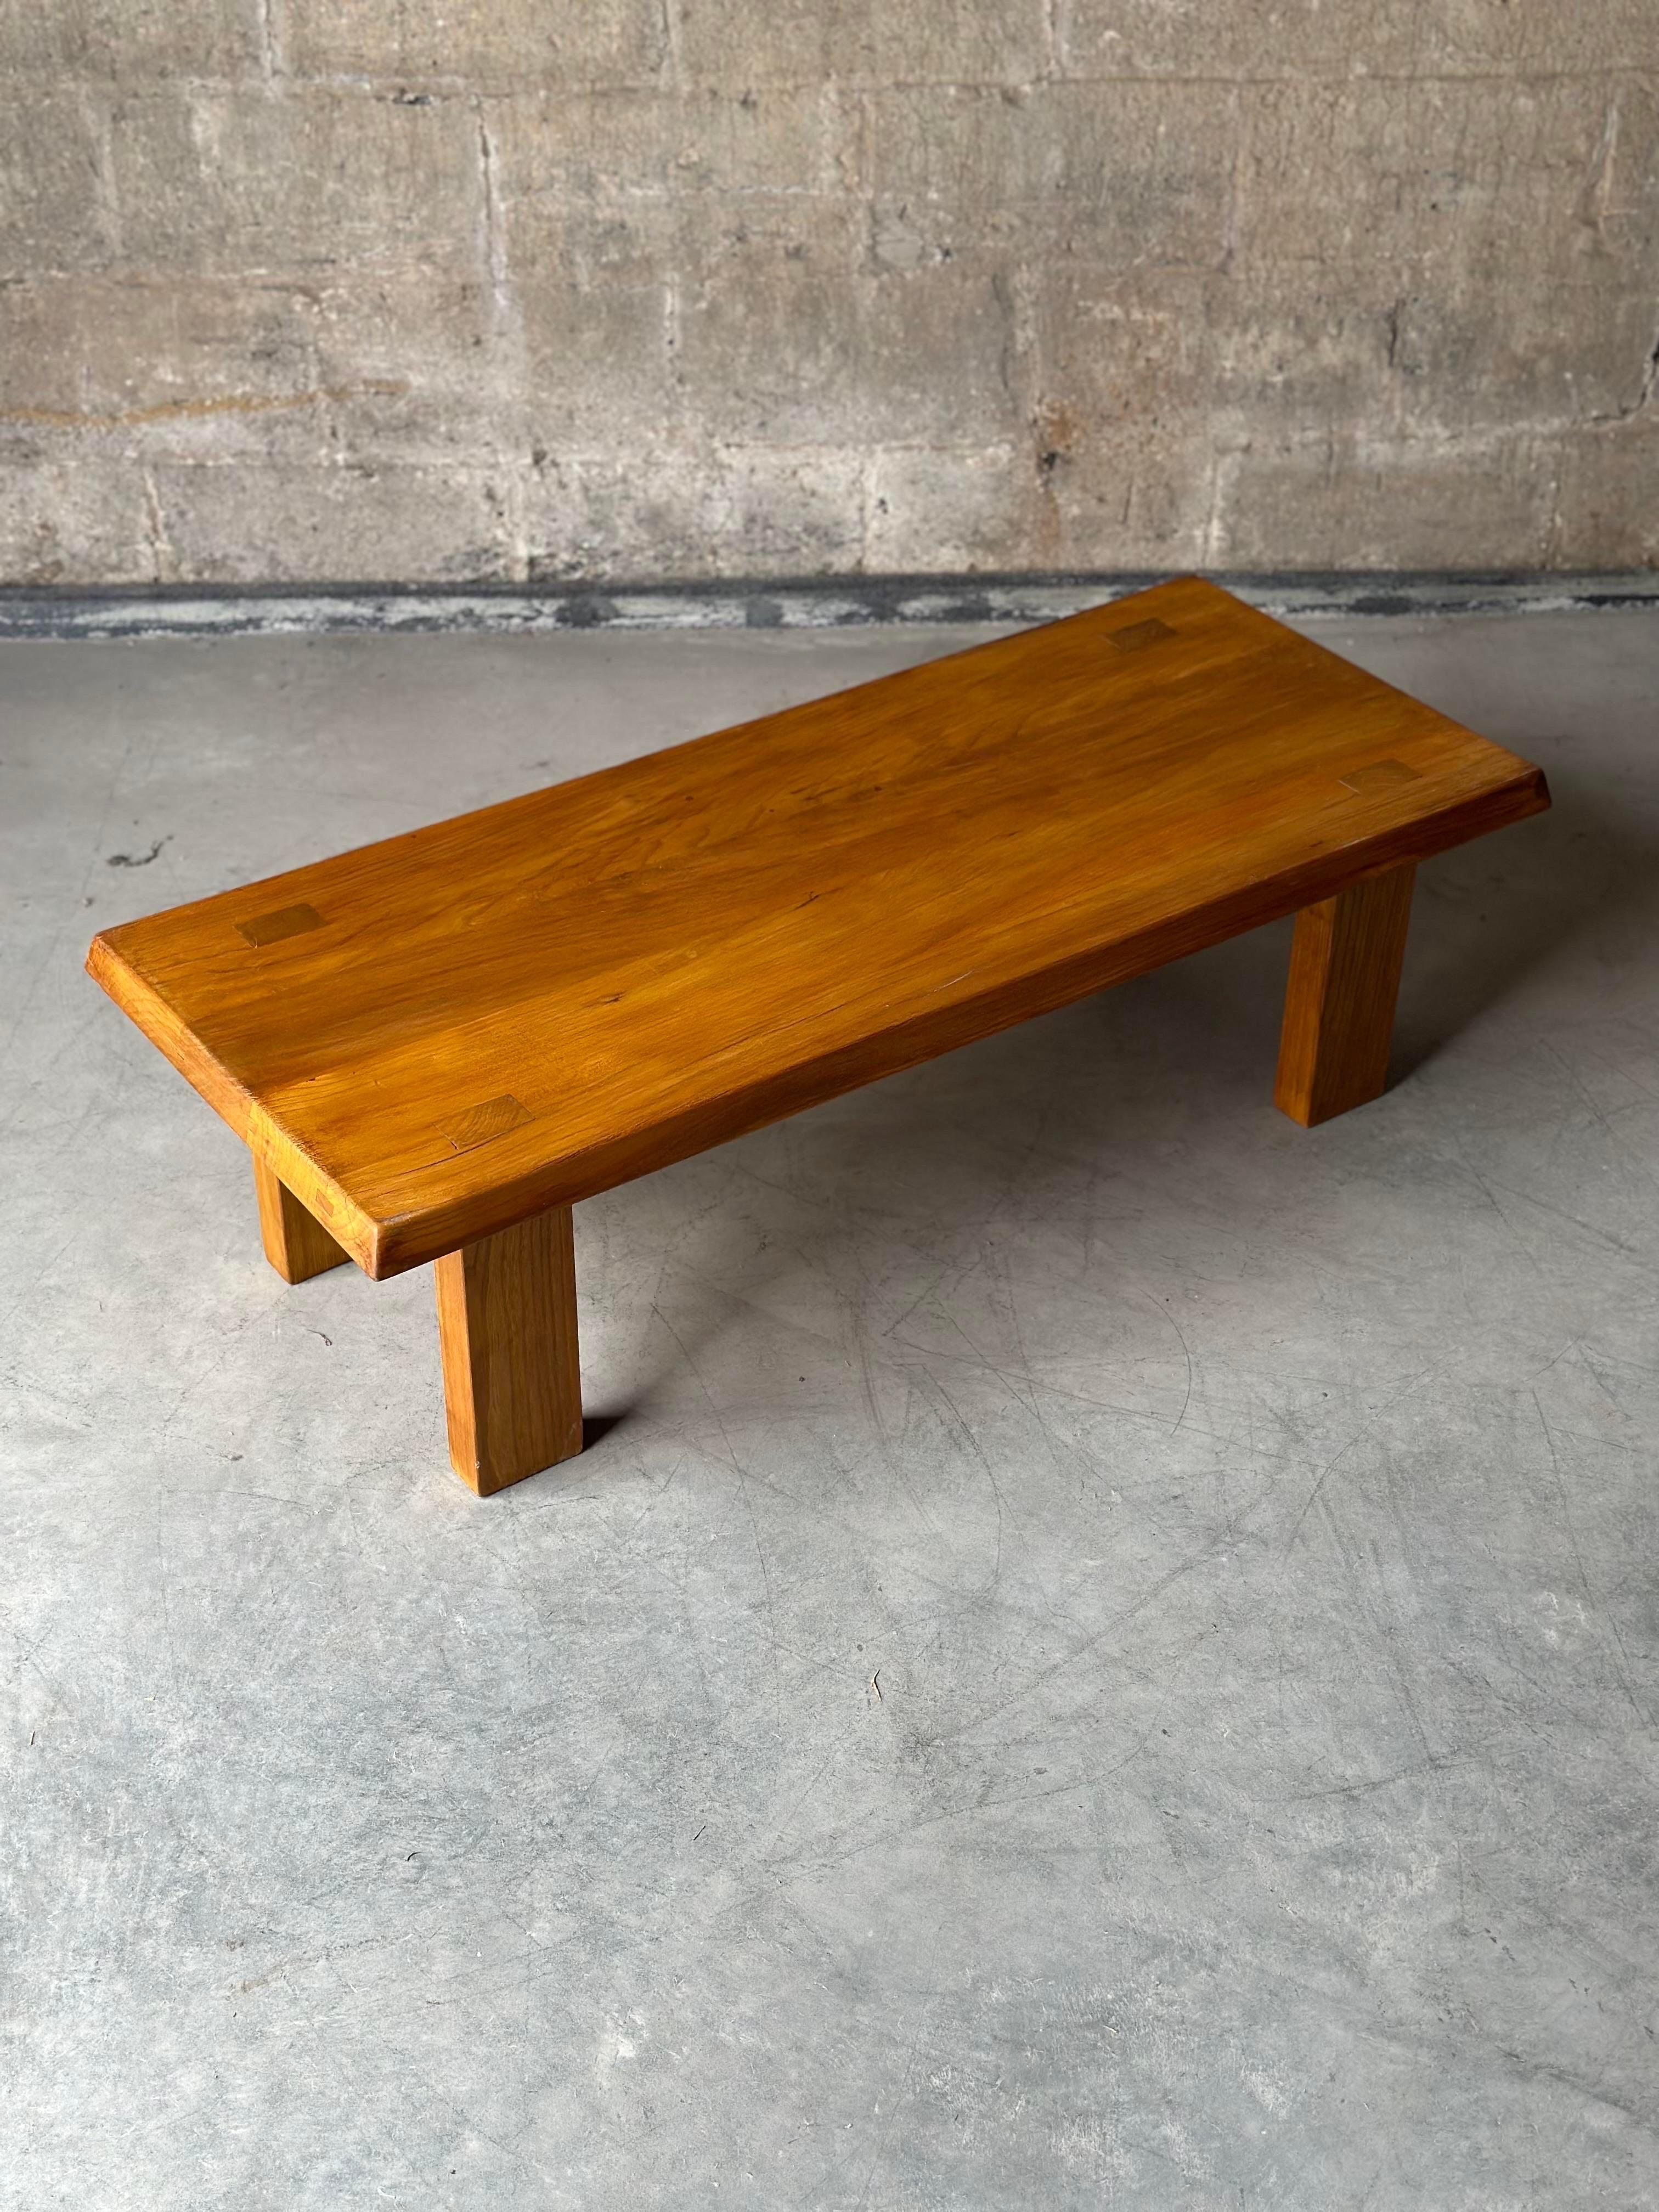 French model T08 A coffee table designed by Pierre Chapo. Starkly designed in elm wood, legs secured with mortise and tenon joints that decorate the top side of the table.